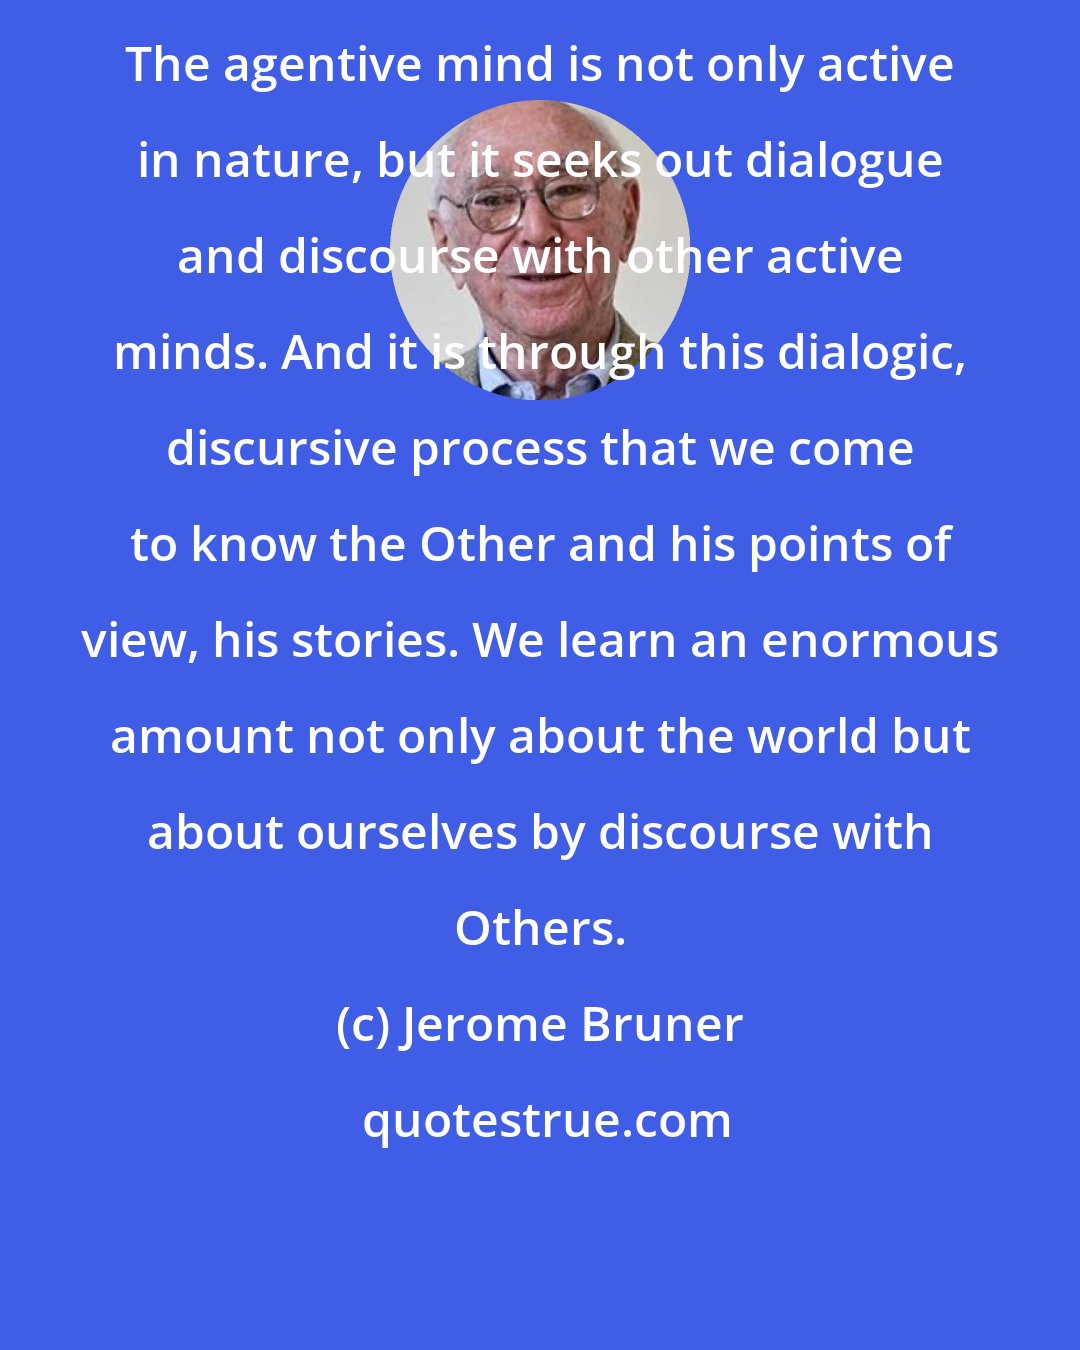 Jerome Bruner: The agentive mind is not only active in nature, but it seeks out dialogue and discourse with other active minds. And it is through this dialogic, discursive process that we come to know the Other and his points of view, his stories. We learn an enormous amount not only about the world but about ourselves by discourse with Others.